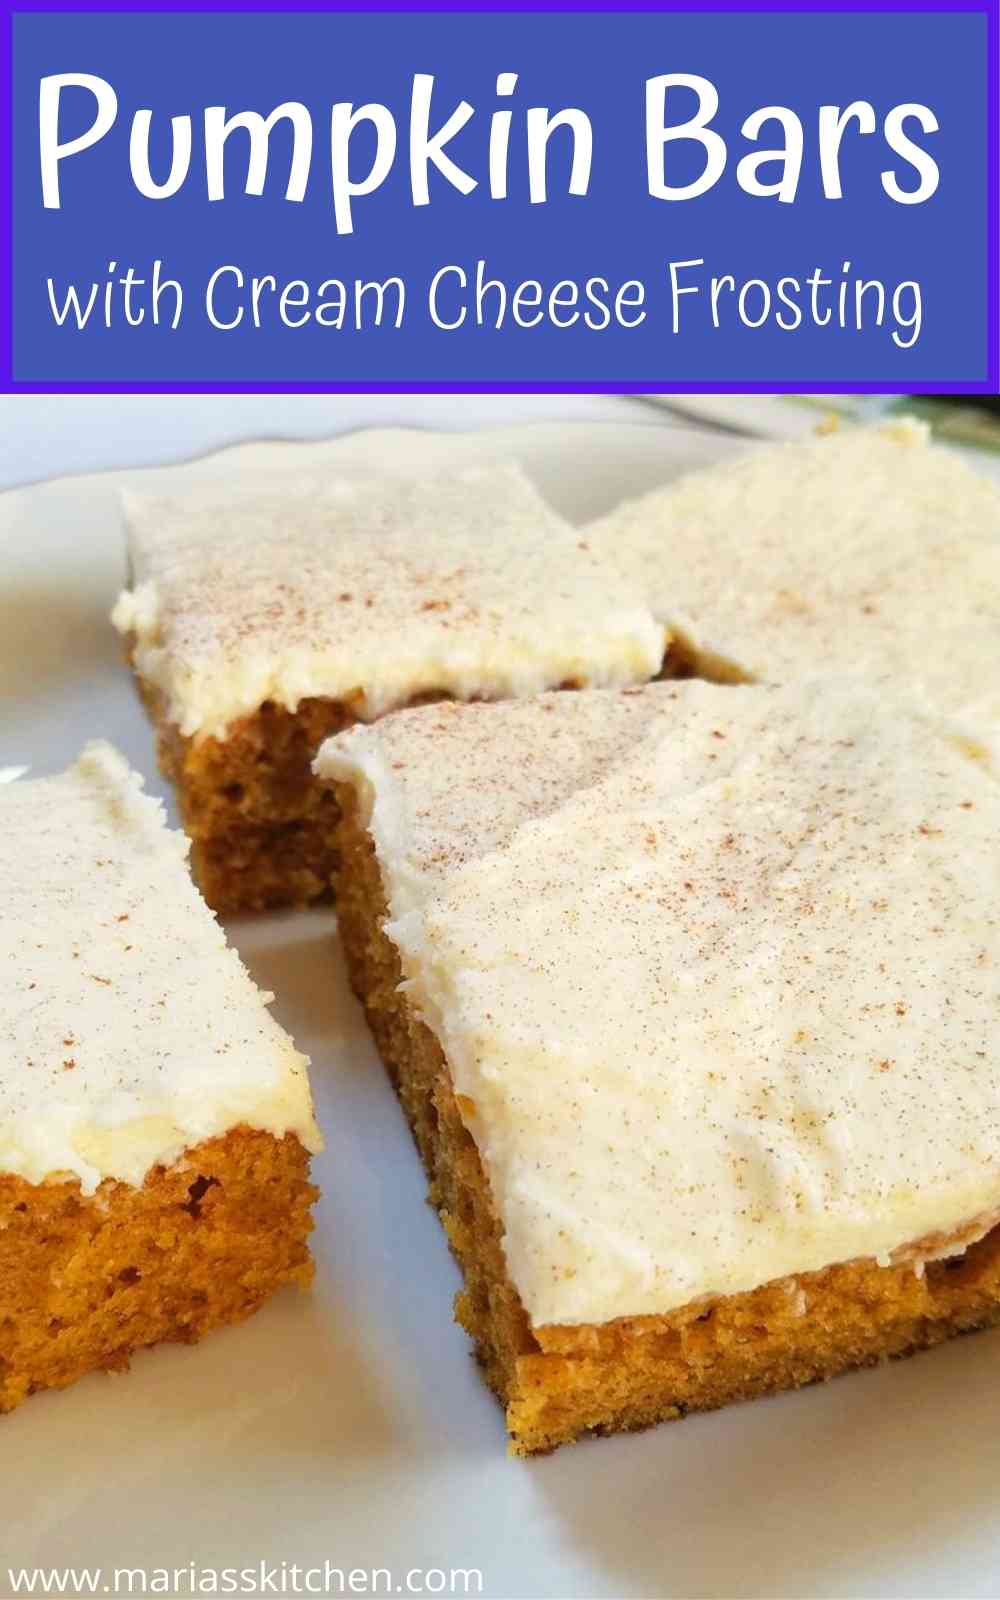 Delicious Pumpkin Bars with Cream Cheese Frosting - Maria's Kitchen